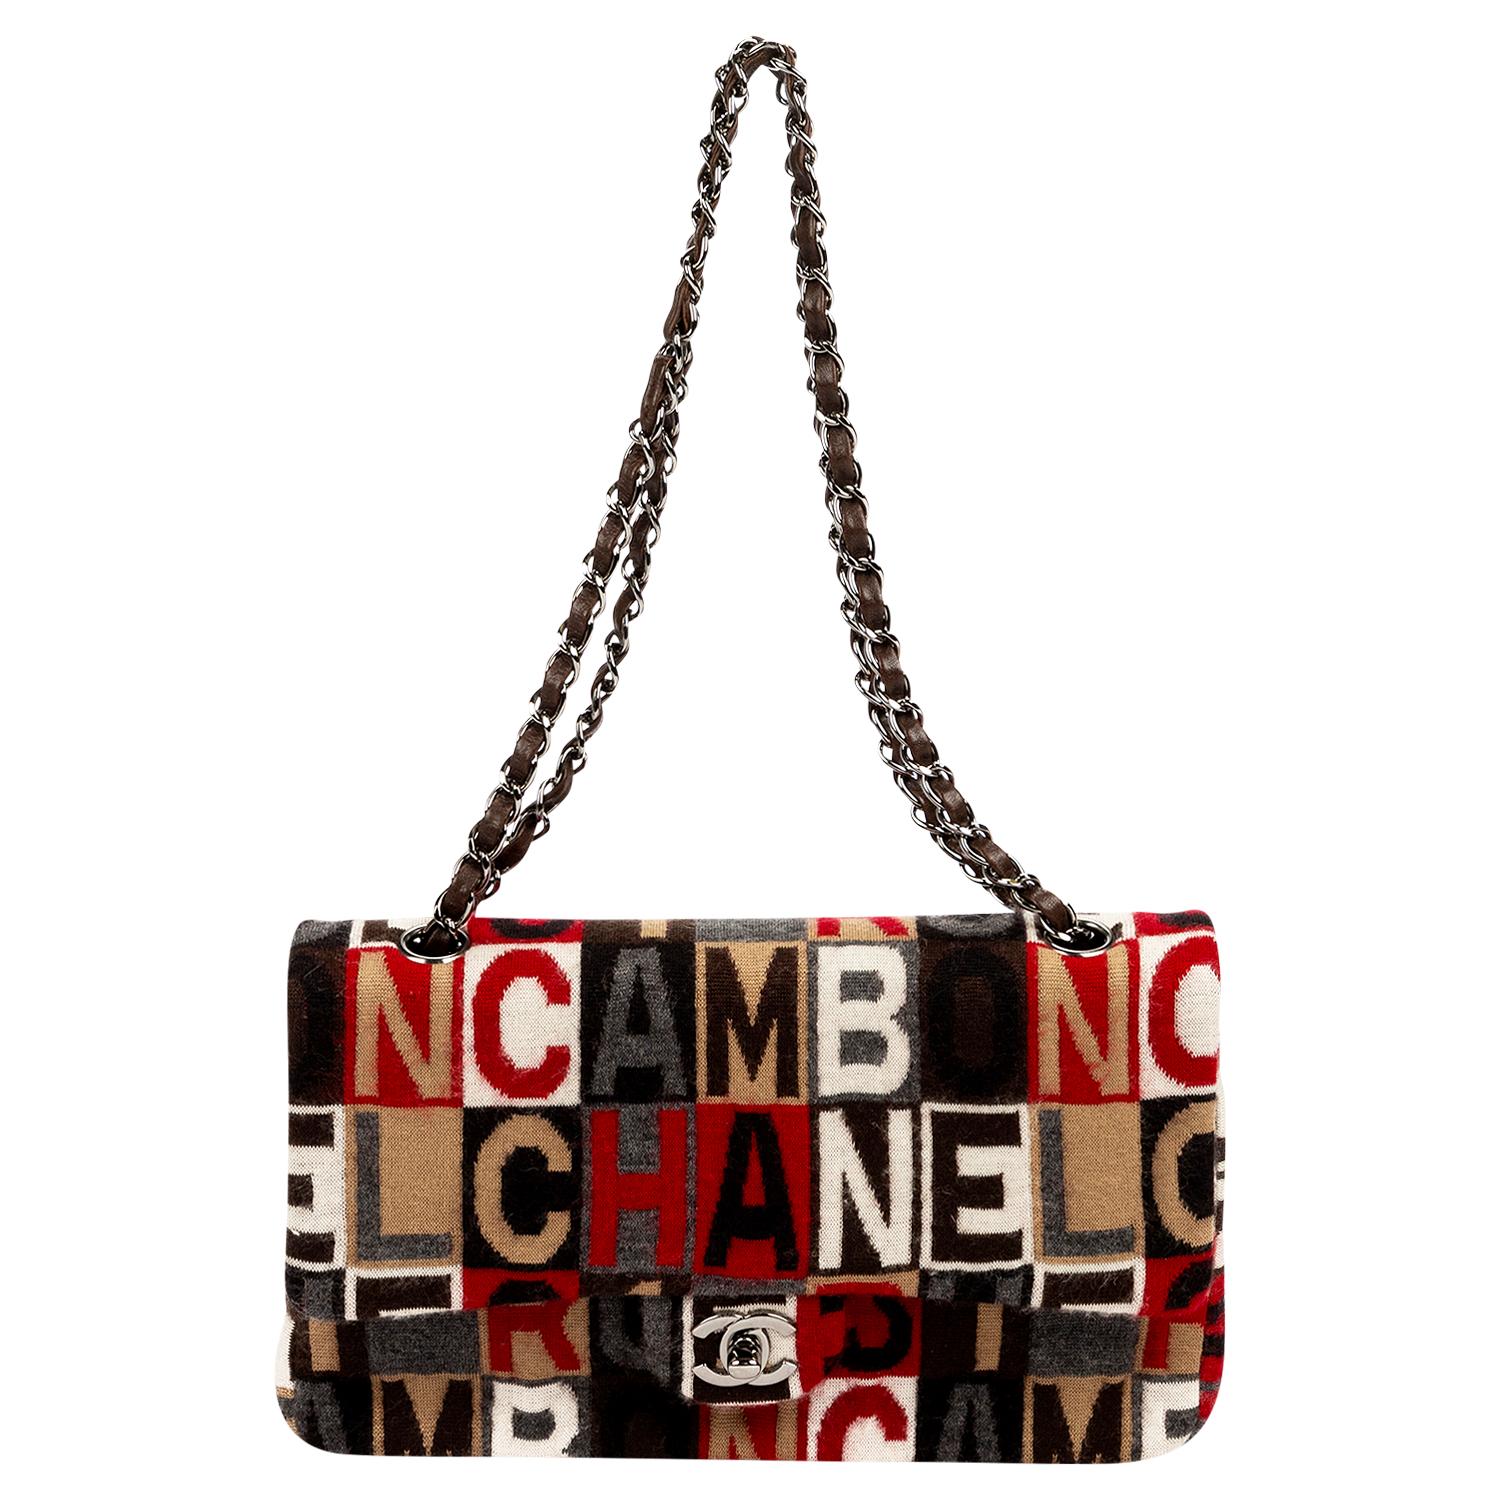 We are obsessed with how fashionable and versatile this double flap bag is! Crafted in a super soft patchwork jersey cotton with a 31 Rue Cambon motif throughout. The colors are super complementary – browns, red, white, black, gray. The trimming is